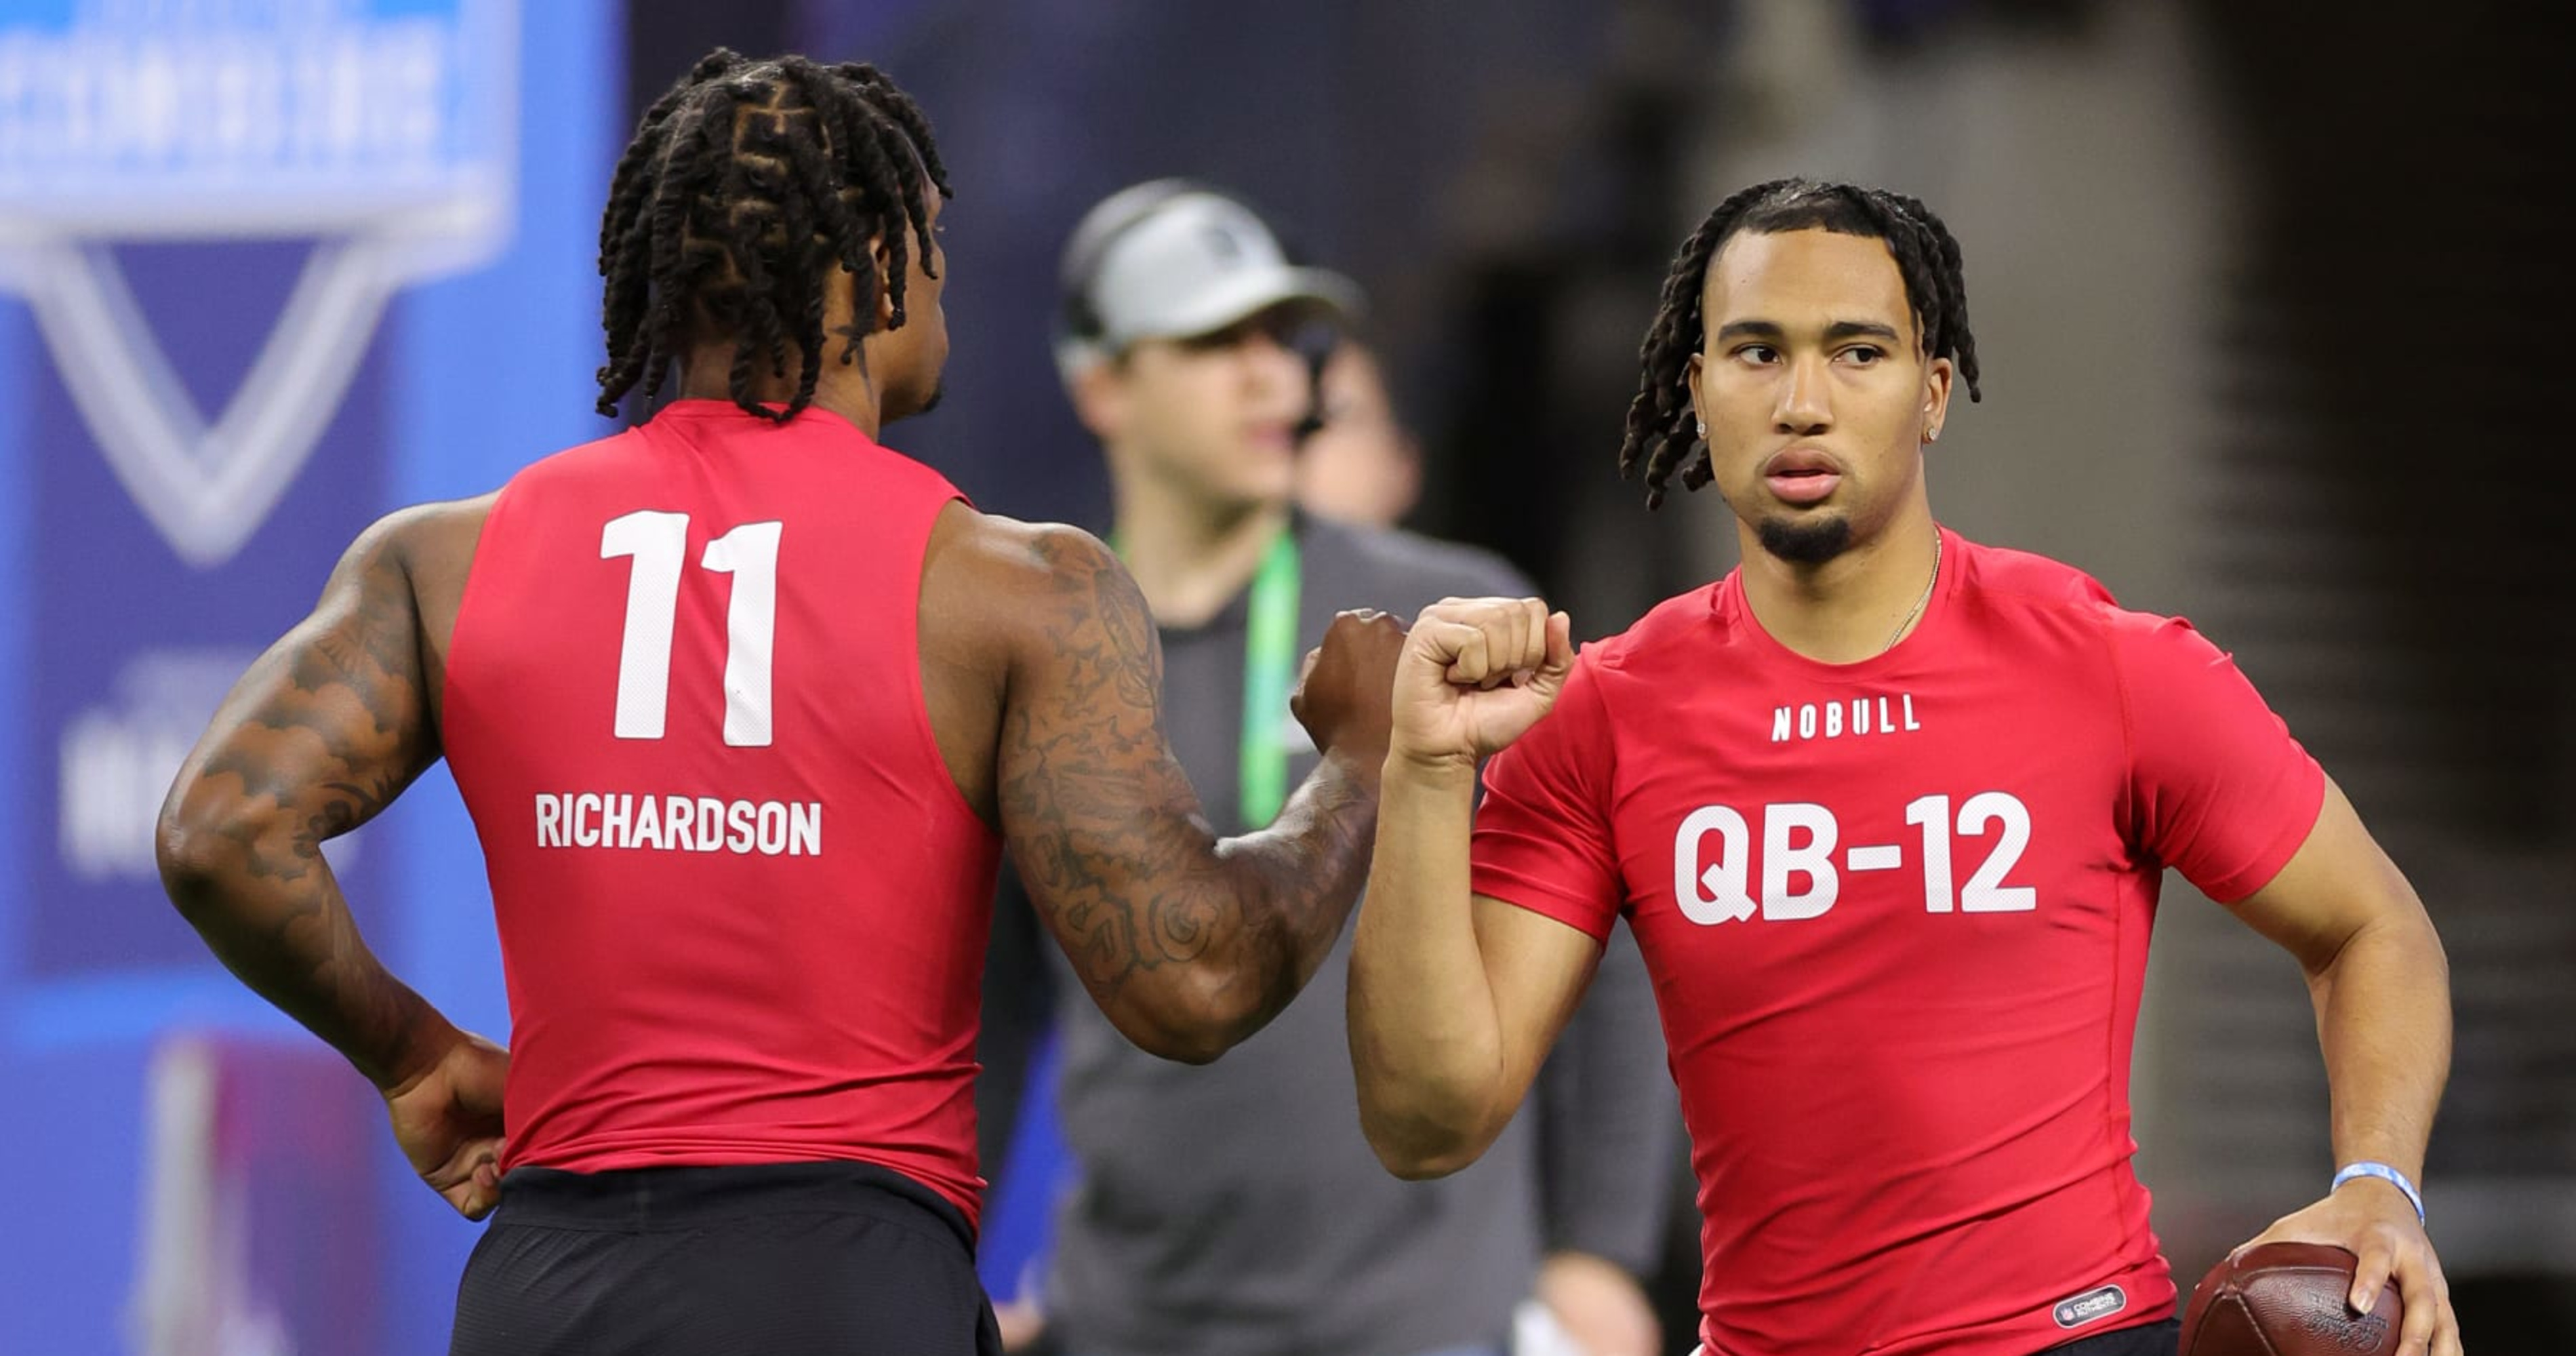 2023 NFL Draft Predictions: No. 1 Pick, Anthony Richardson, and more 